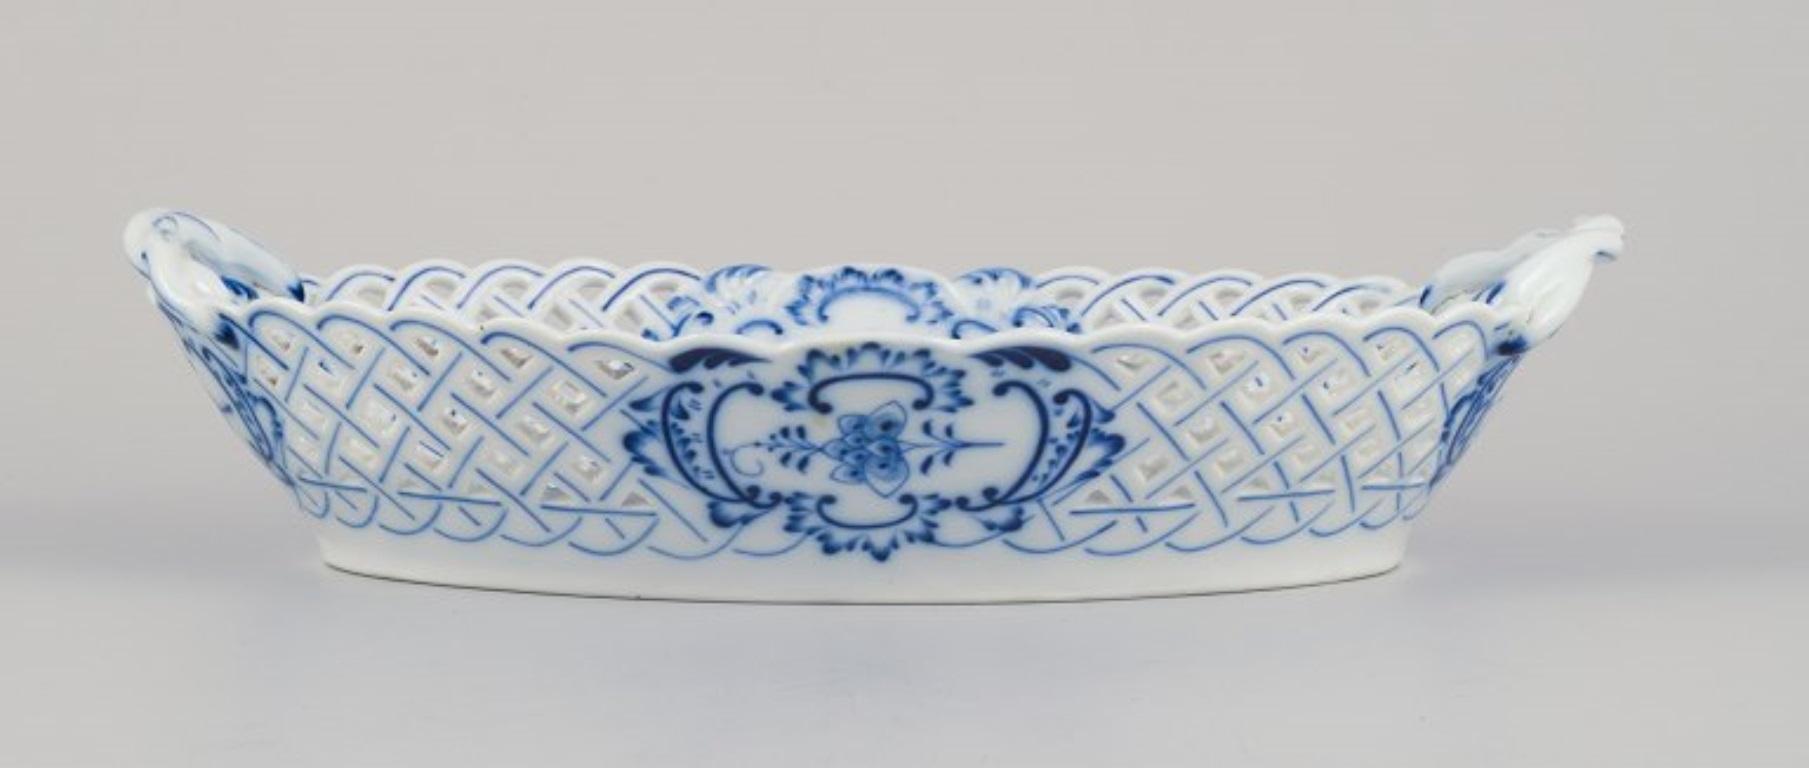 Hand-Painted Stadt Meissen, Germany. Blue Onion pattern open lace bowl in porcelain.